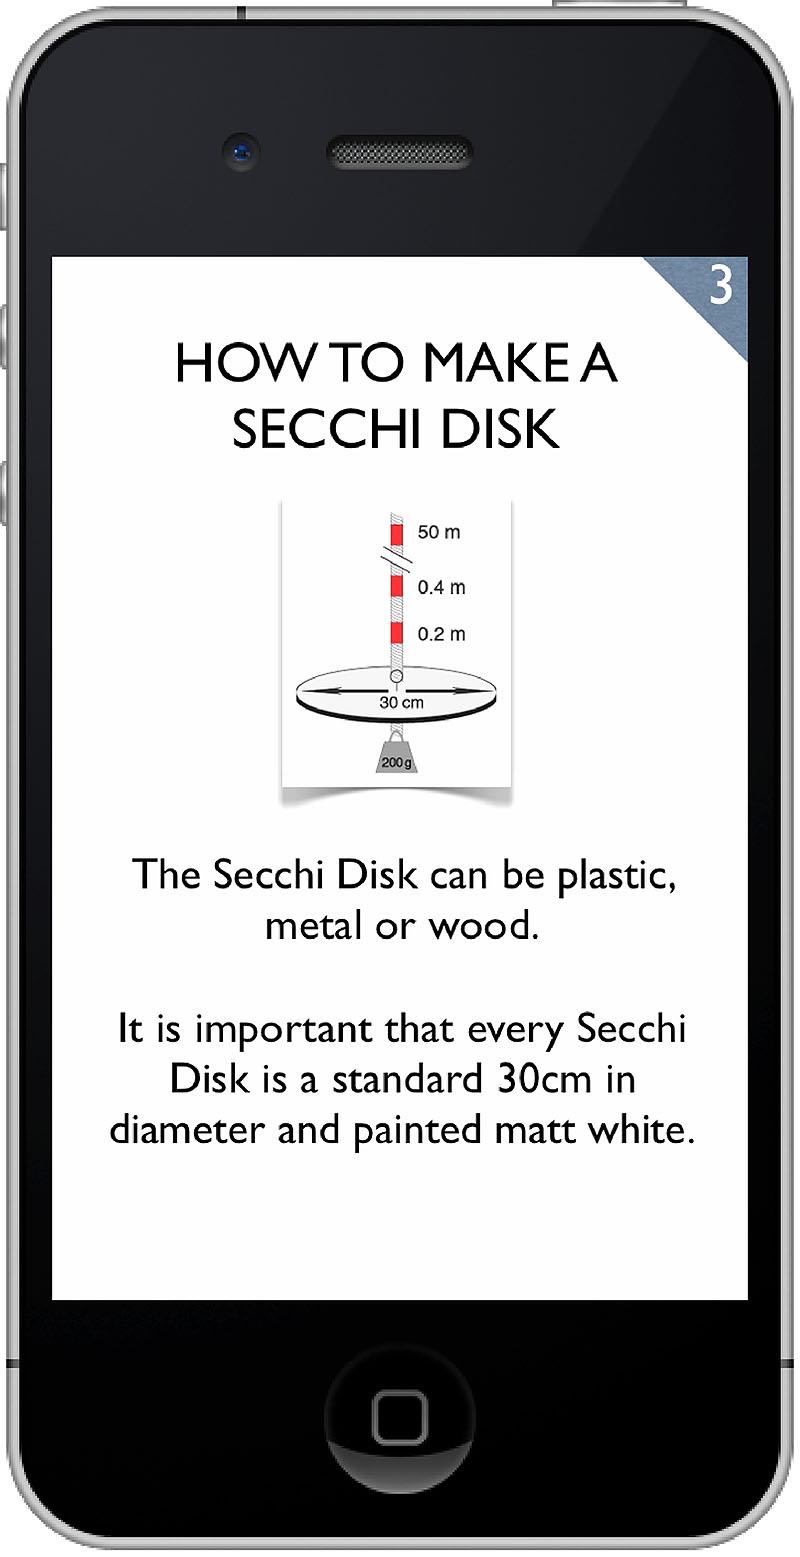 Construction page of the Secchi App photo copyright Secchi Disk Study taken at 